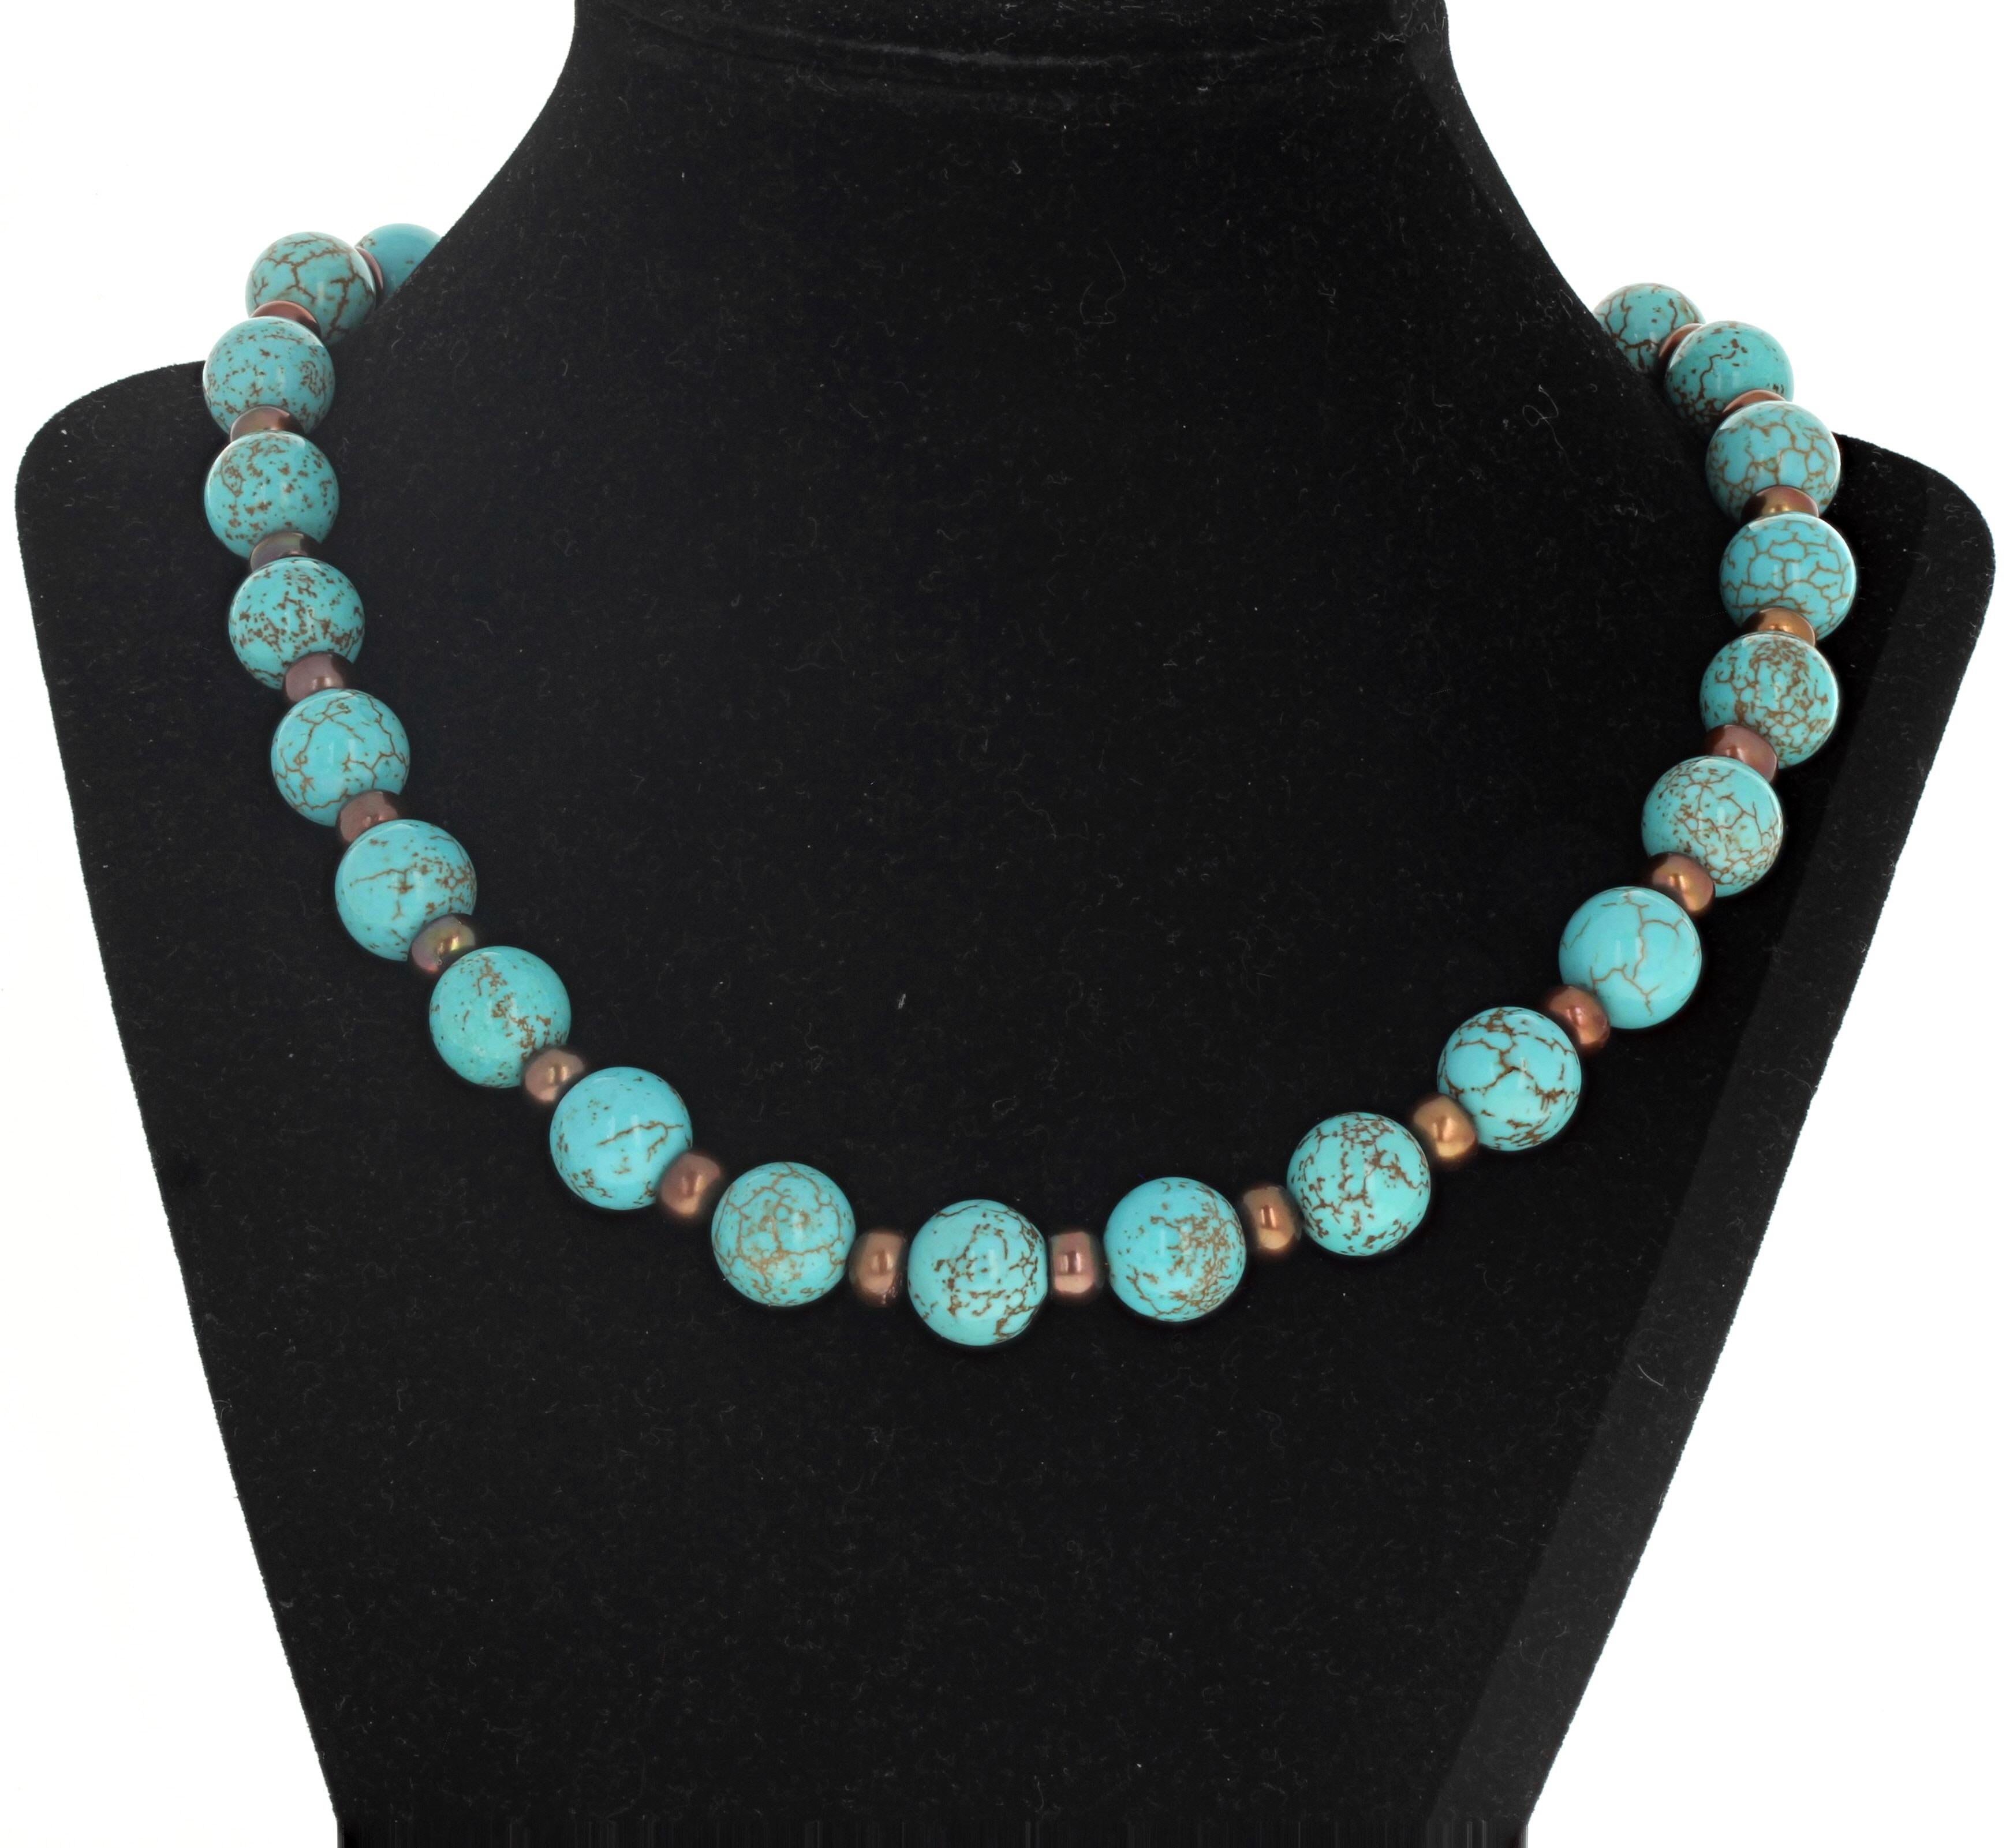 Natural highly polished blue Magnesite (approximately 12mm) is enhanced with natural rare goldy brownish coral rondels (approximately 7mm) in this lovely  18 inch long necklace.  The clasp is an easy to us silver hook clasp.